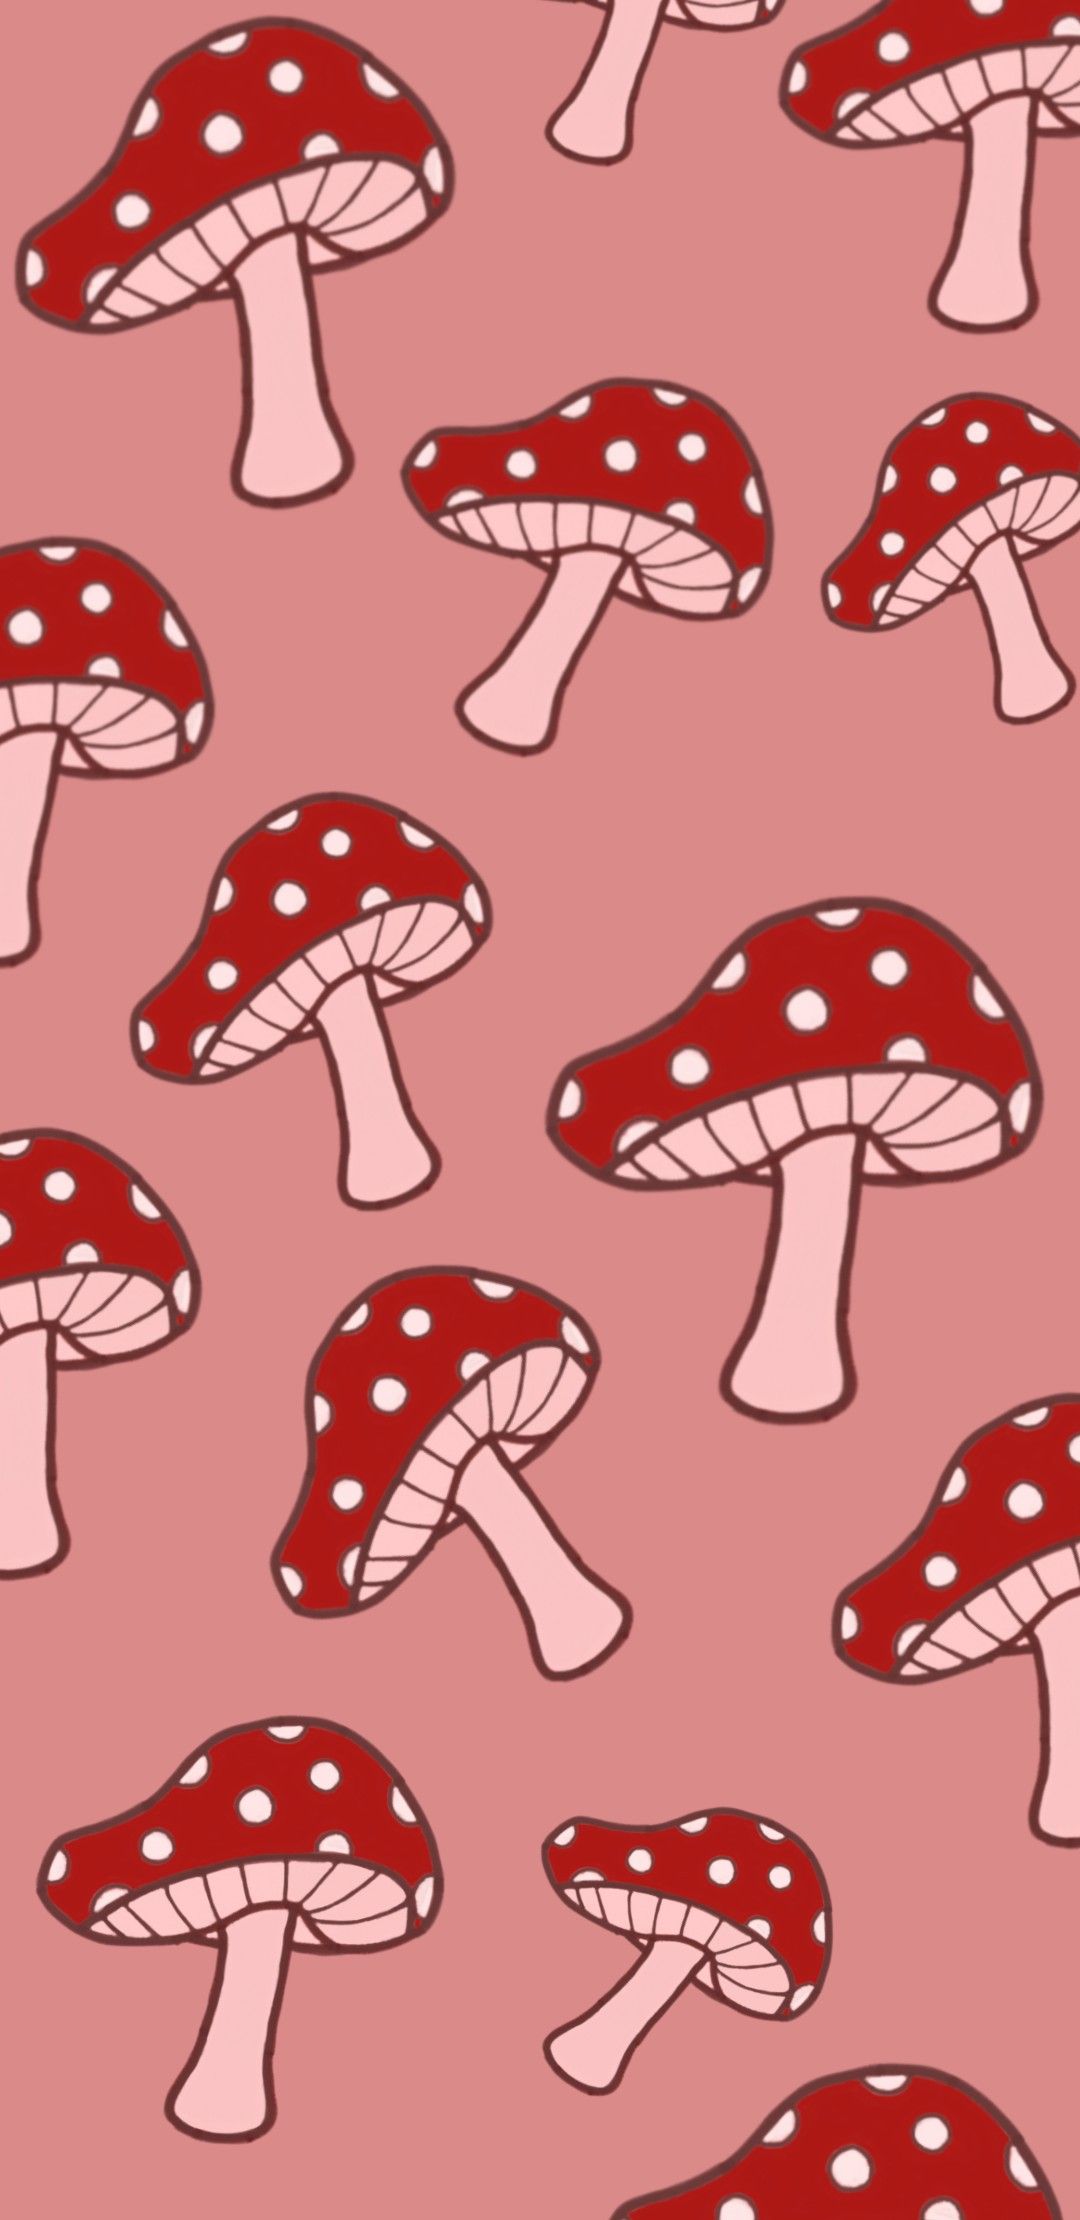 Mushroom Wallpapers and Backgrounds  WallpaperCG